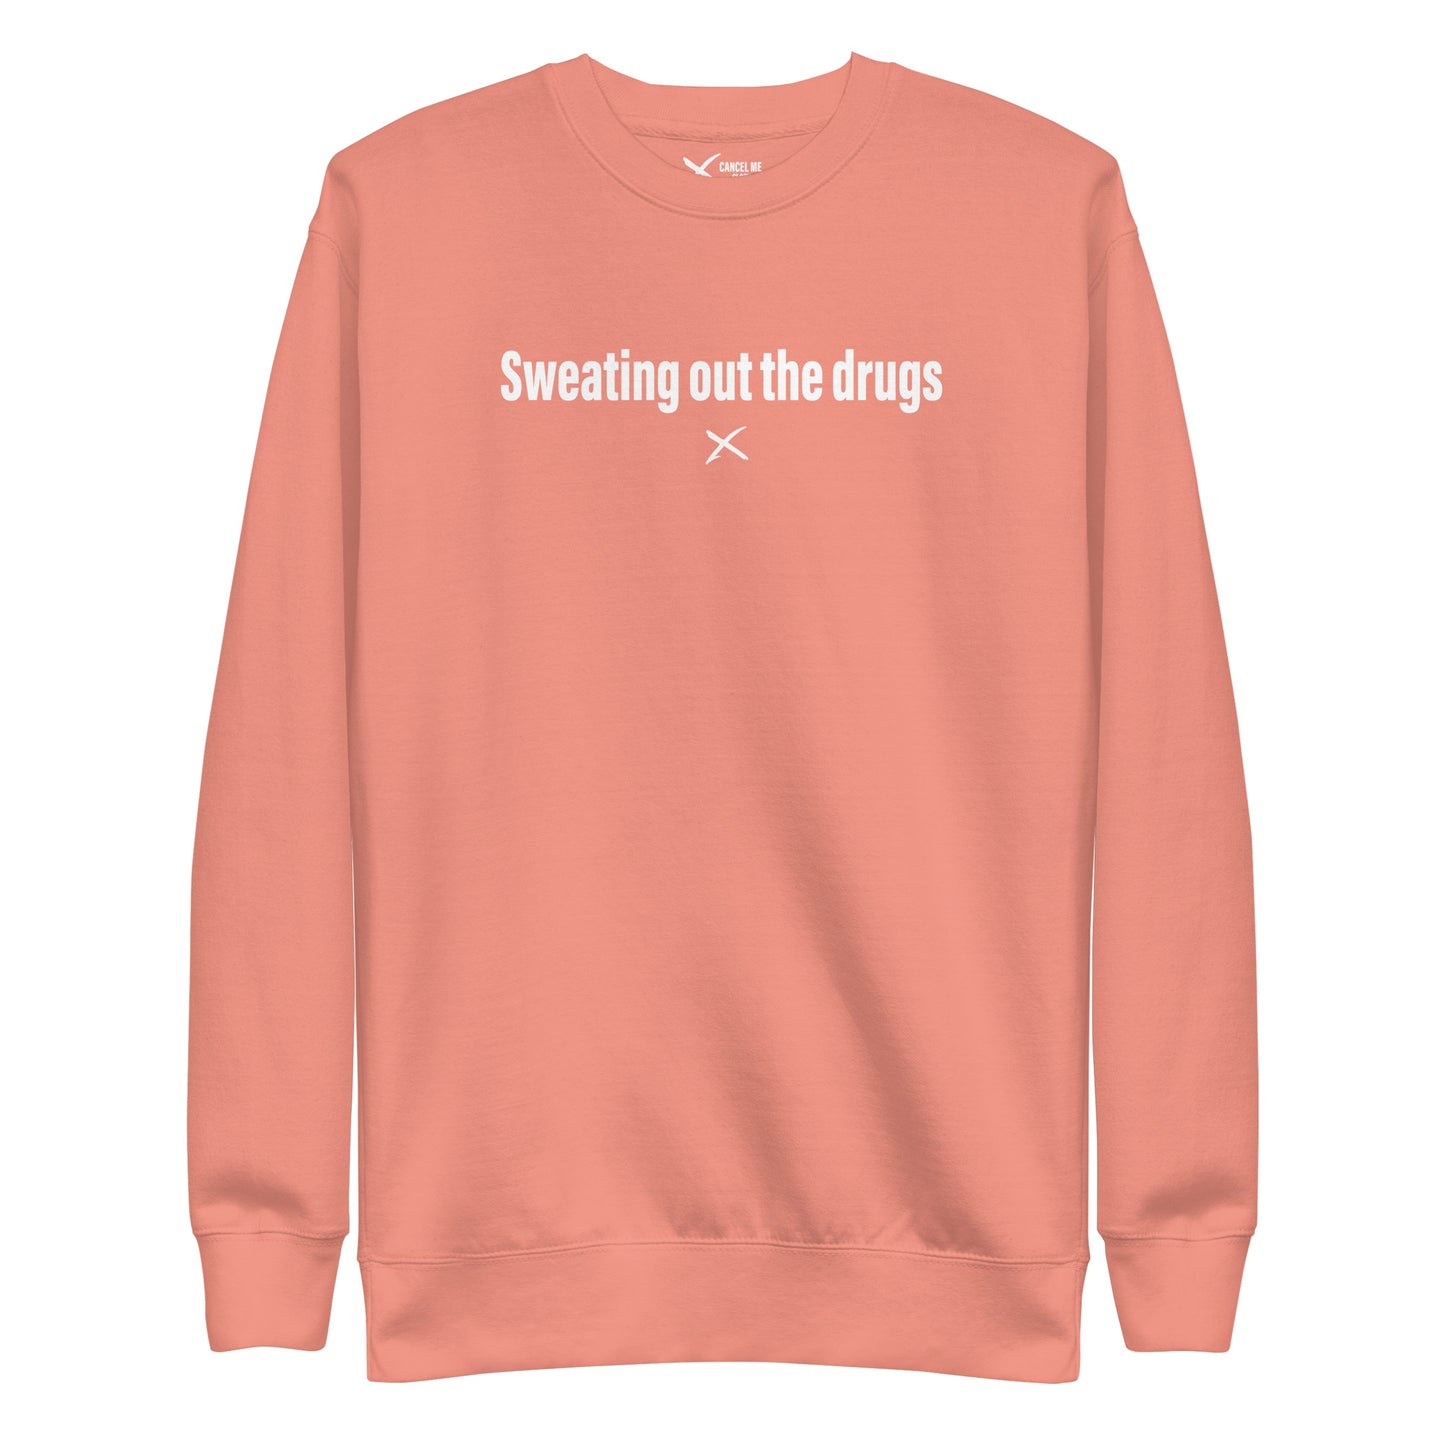 Sweating out the drugs - Sweatshirt